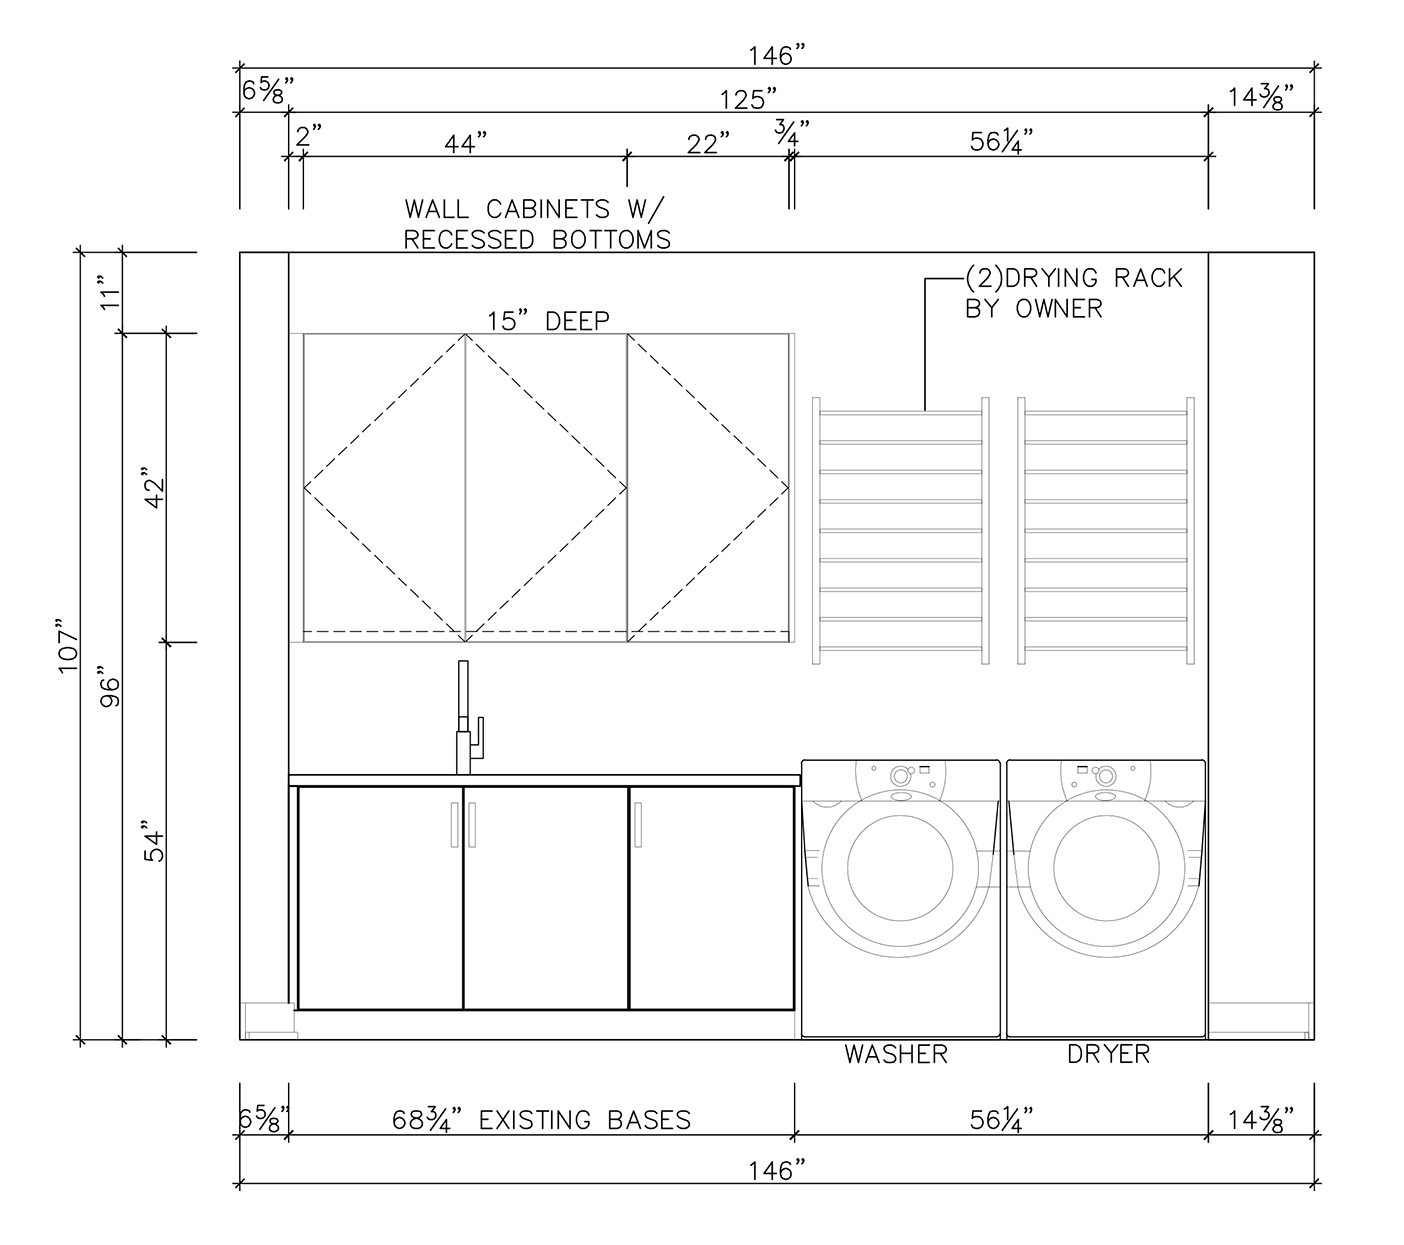 CADD drawing of laundry space